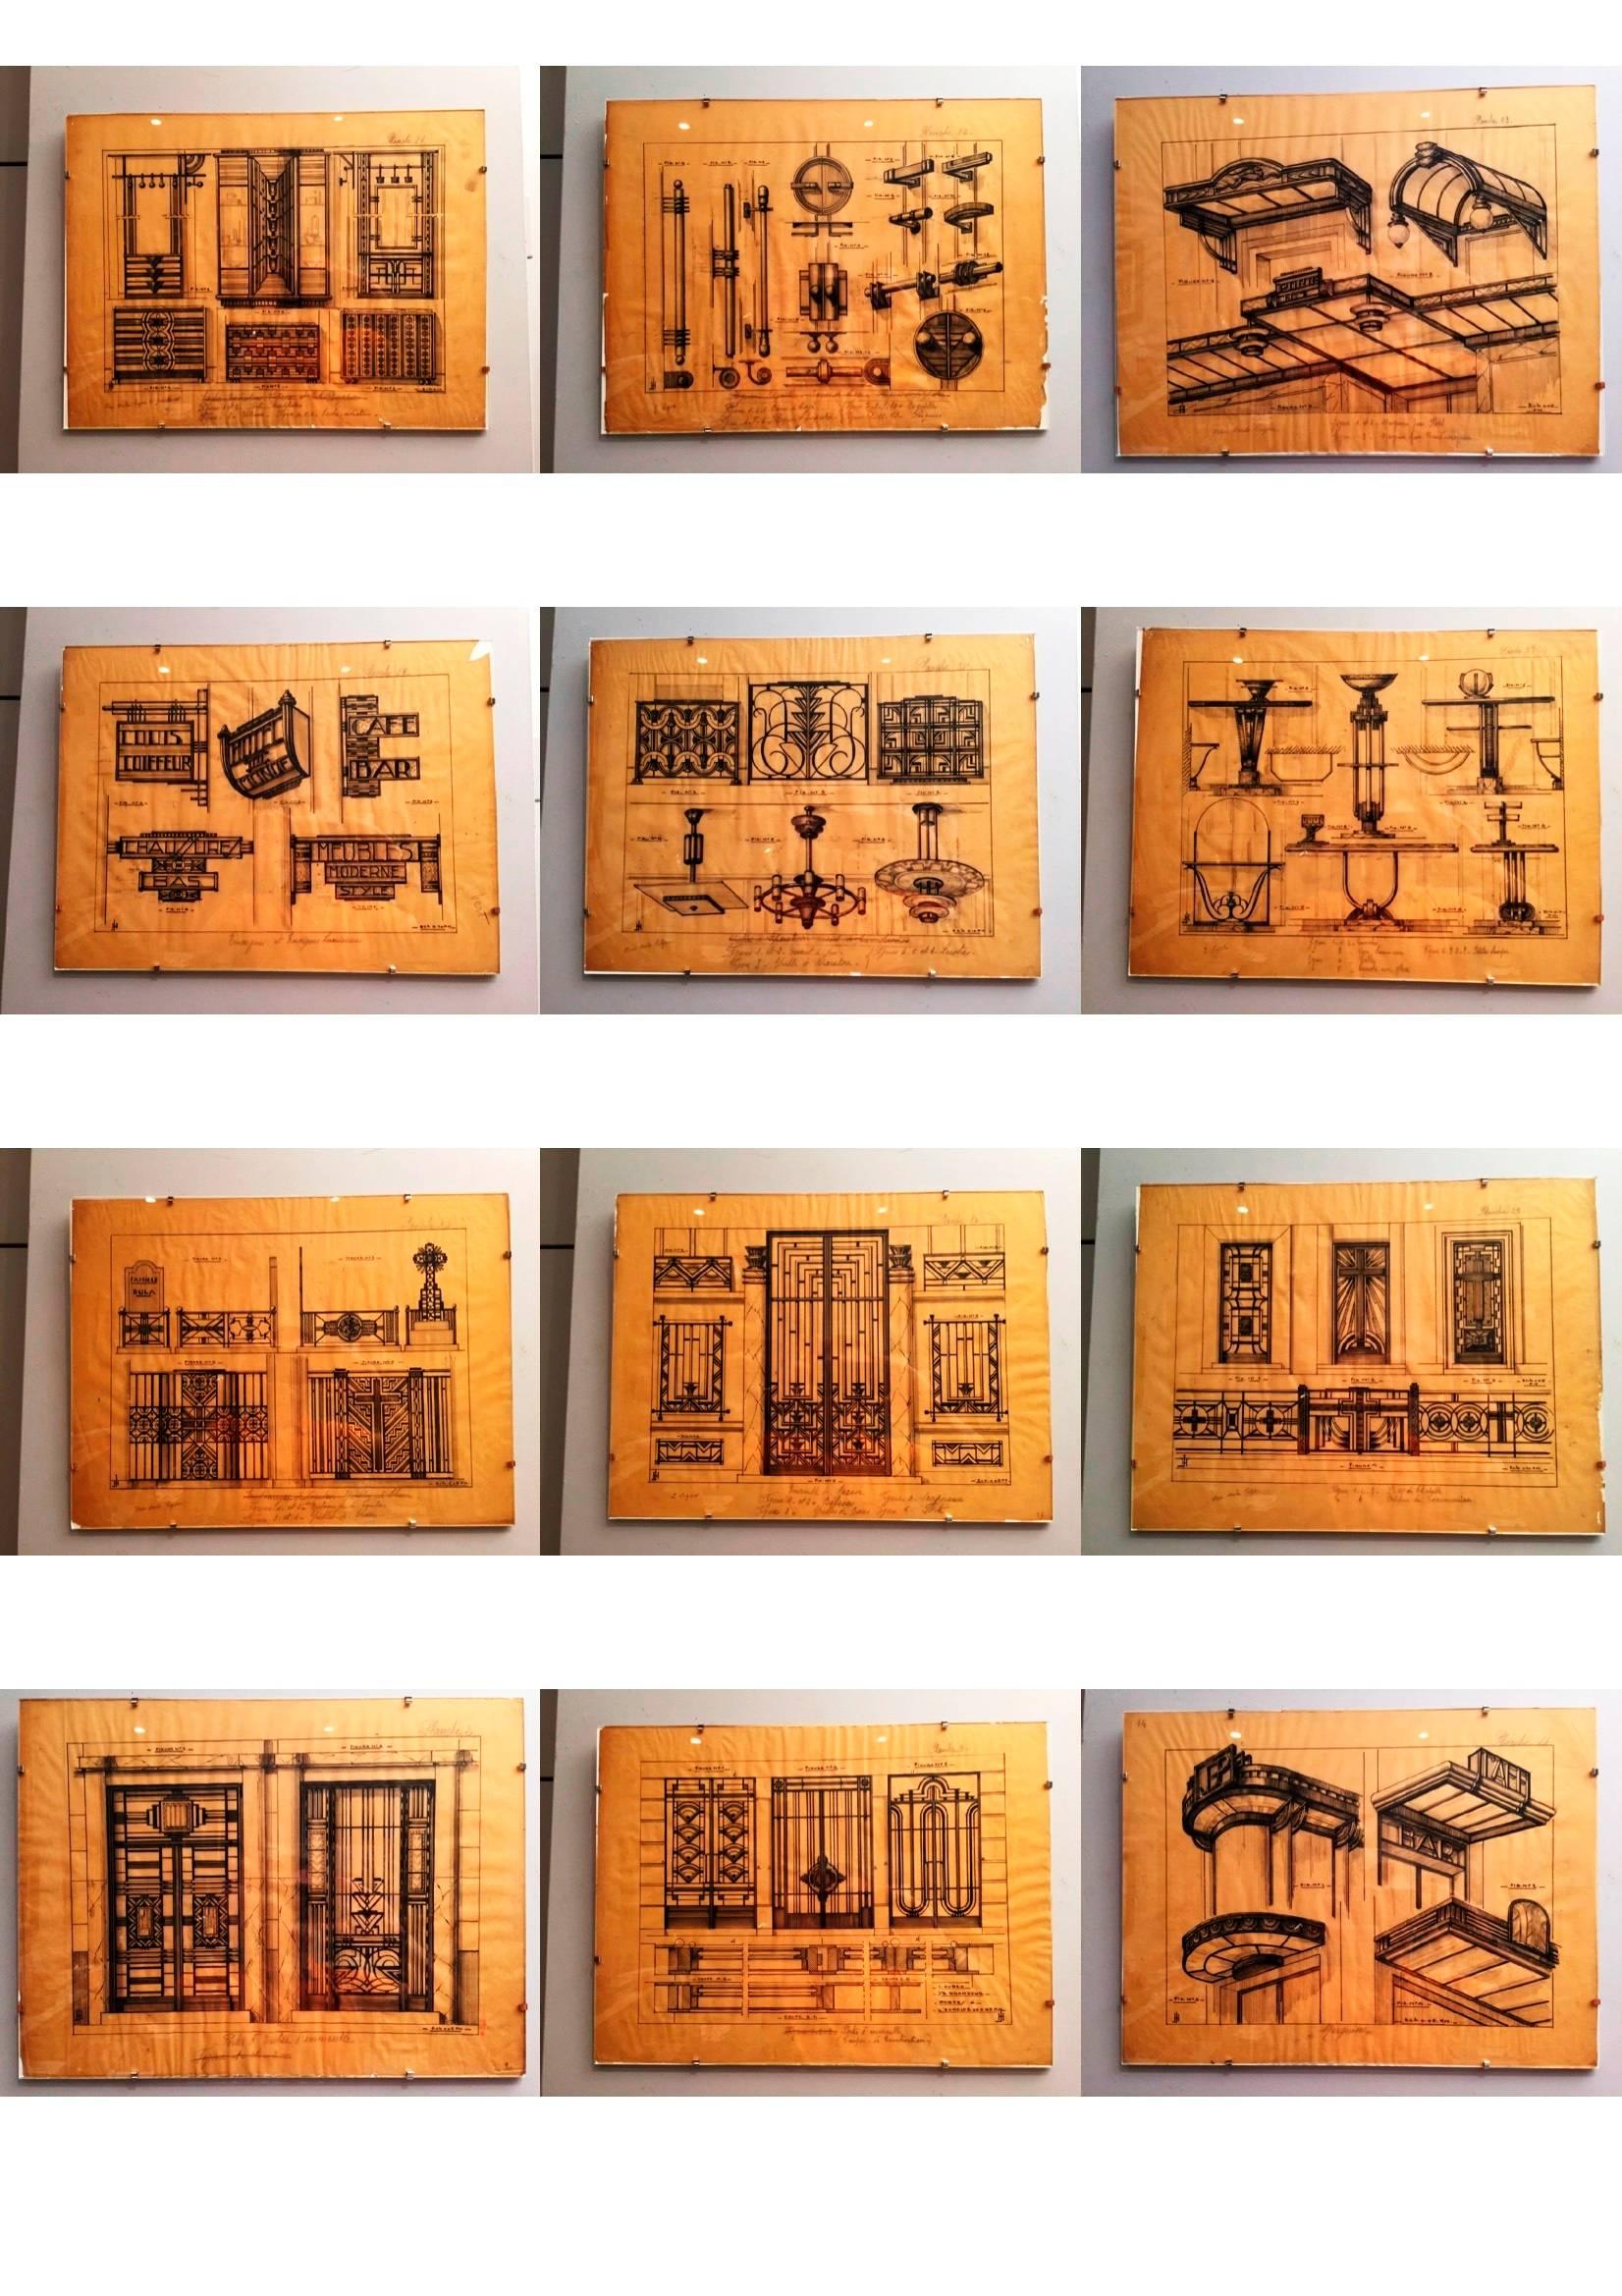 Rare  set of 28 original Art Deco period drawings of Decorative Metalworks.
These are the original preparatory architecture drawings, on tracing paper, for a book of plates that was published in the 1930s:
